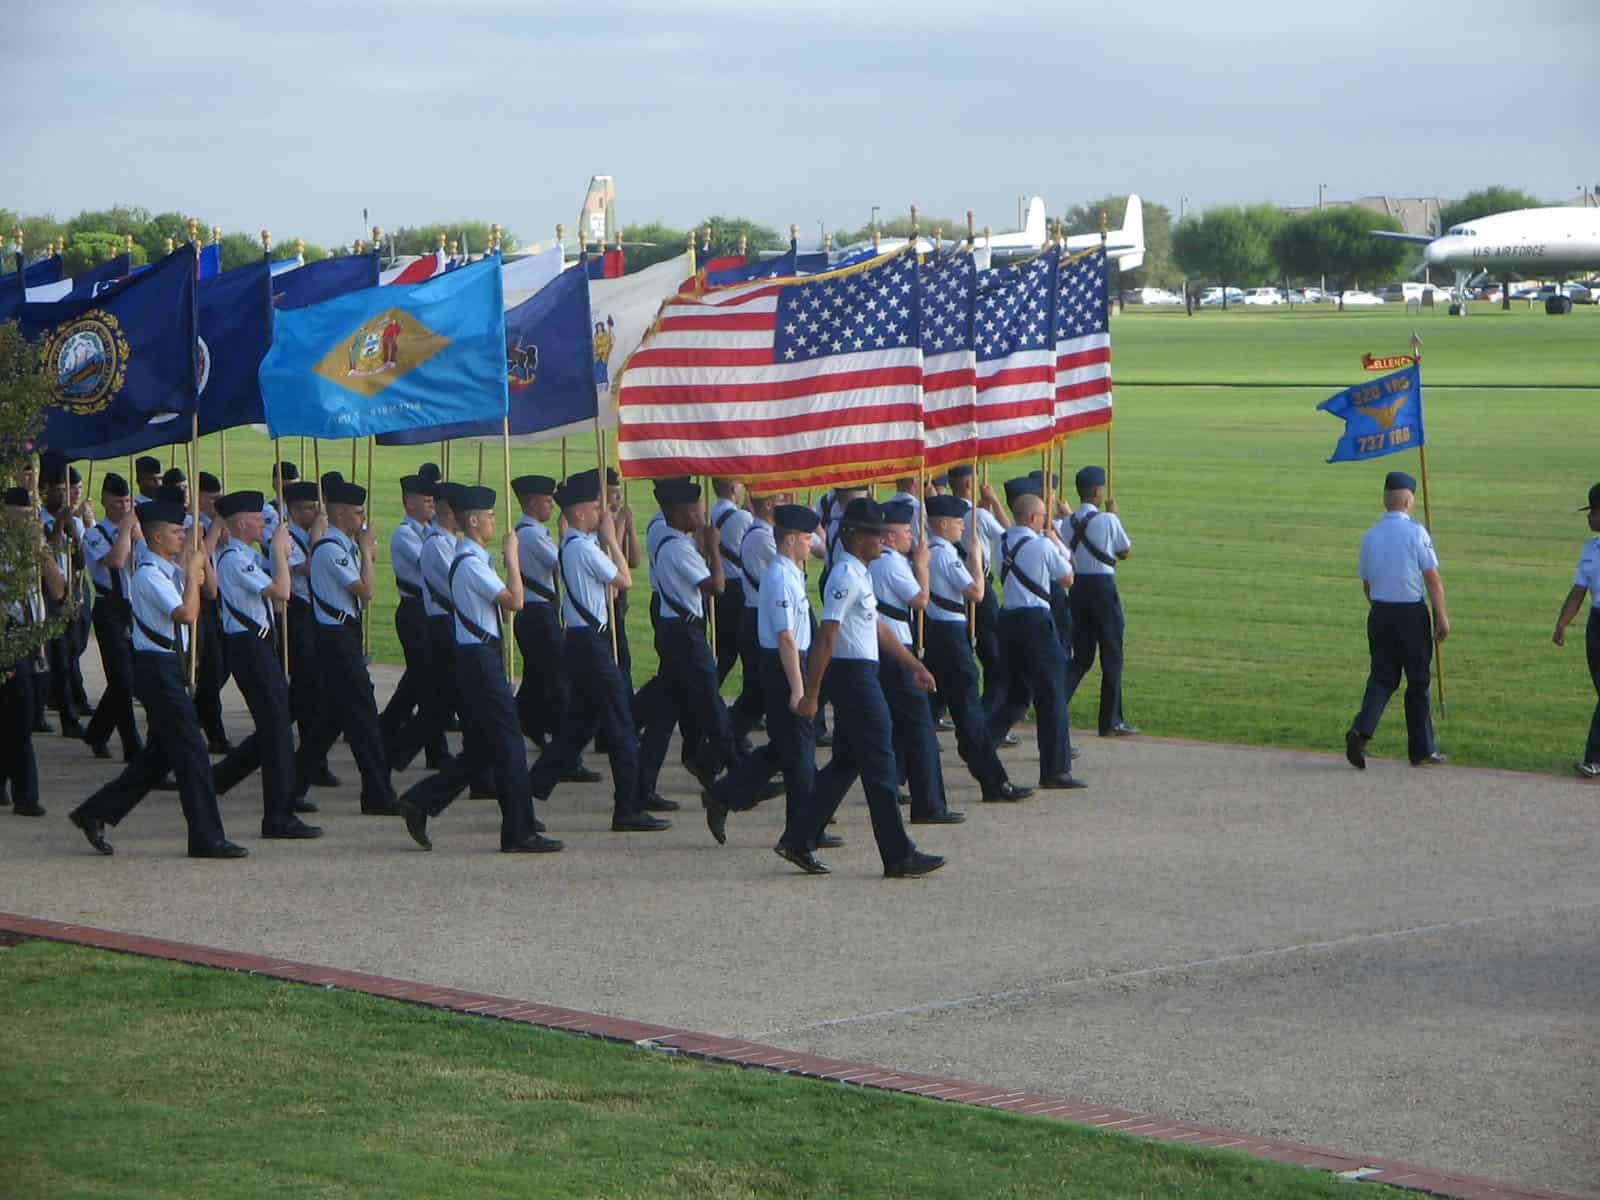 <p>As the most junior enlisted member of the <a href="https://www.airforce.com/">U.S. Air Force</a>, your expected earnings will be $24,206 per year. In this role, you must graduate basic training and become accustomed to <a href="https://www.af.mil/">Air Force branch</a> standards.</p><p><span>Would you please let us know what you think about our content? <p>Agree? Tell us by clicking the “Thumbs Up” button above.</p> Disagree? Leave a comment telling us what you’d change.</span></p>